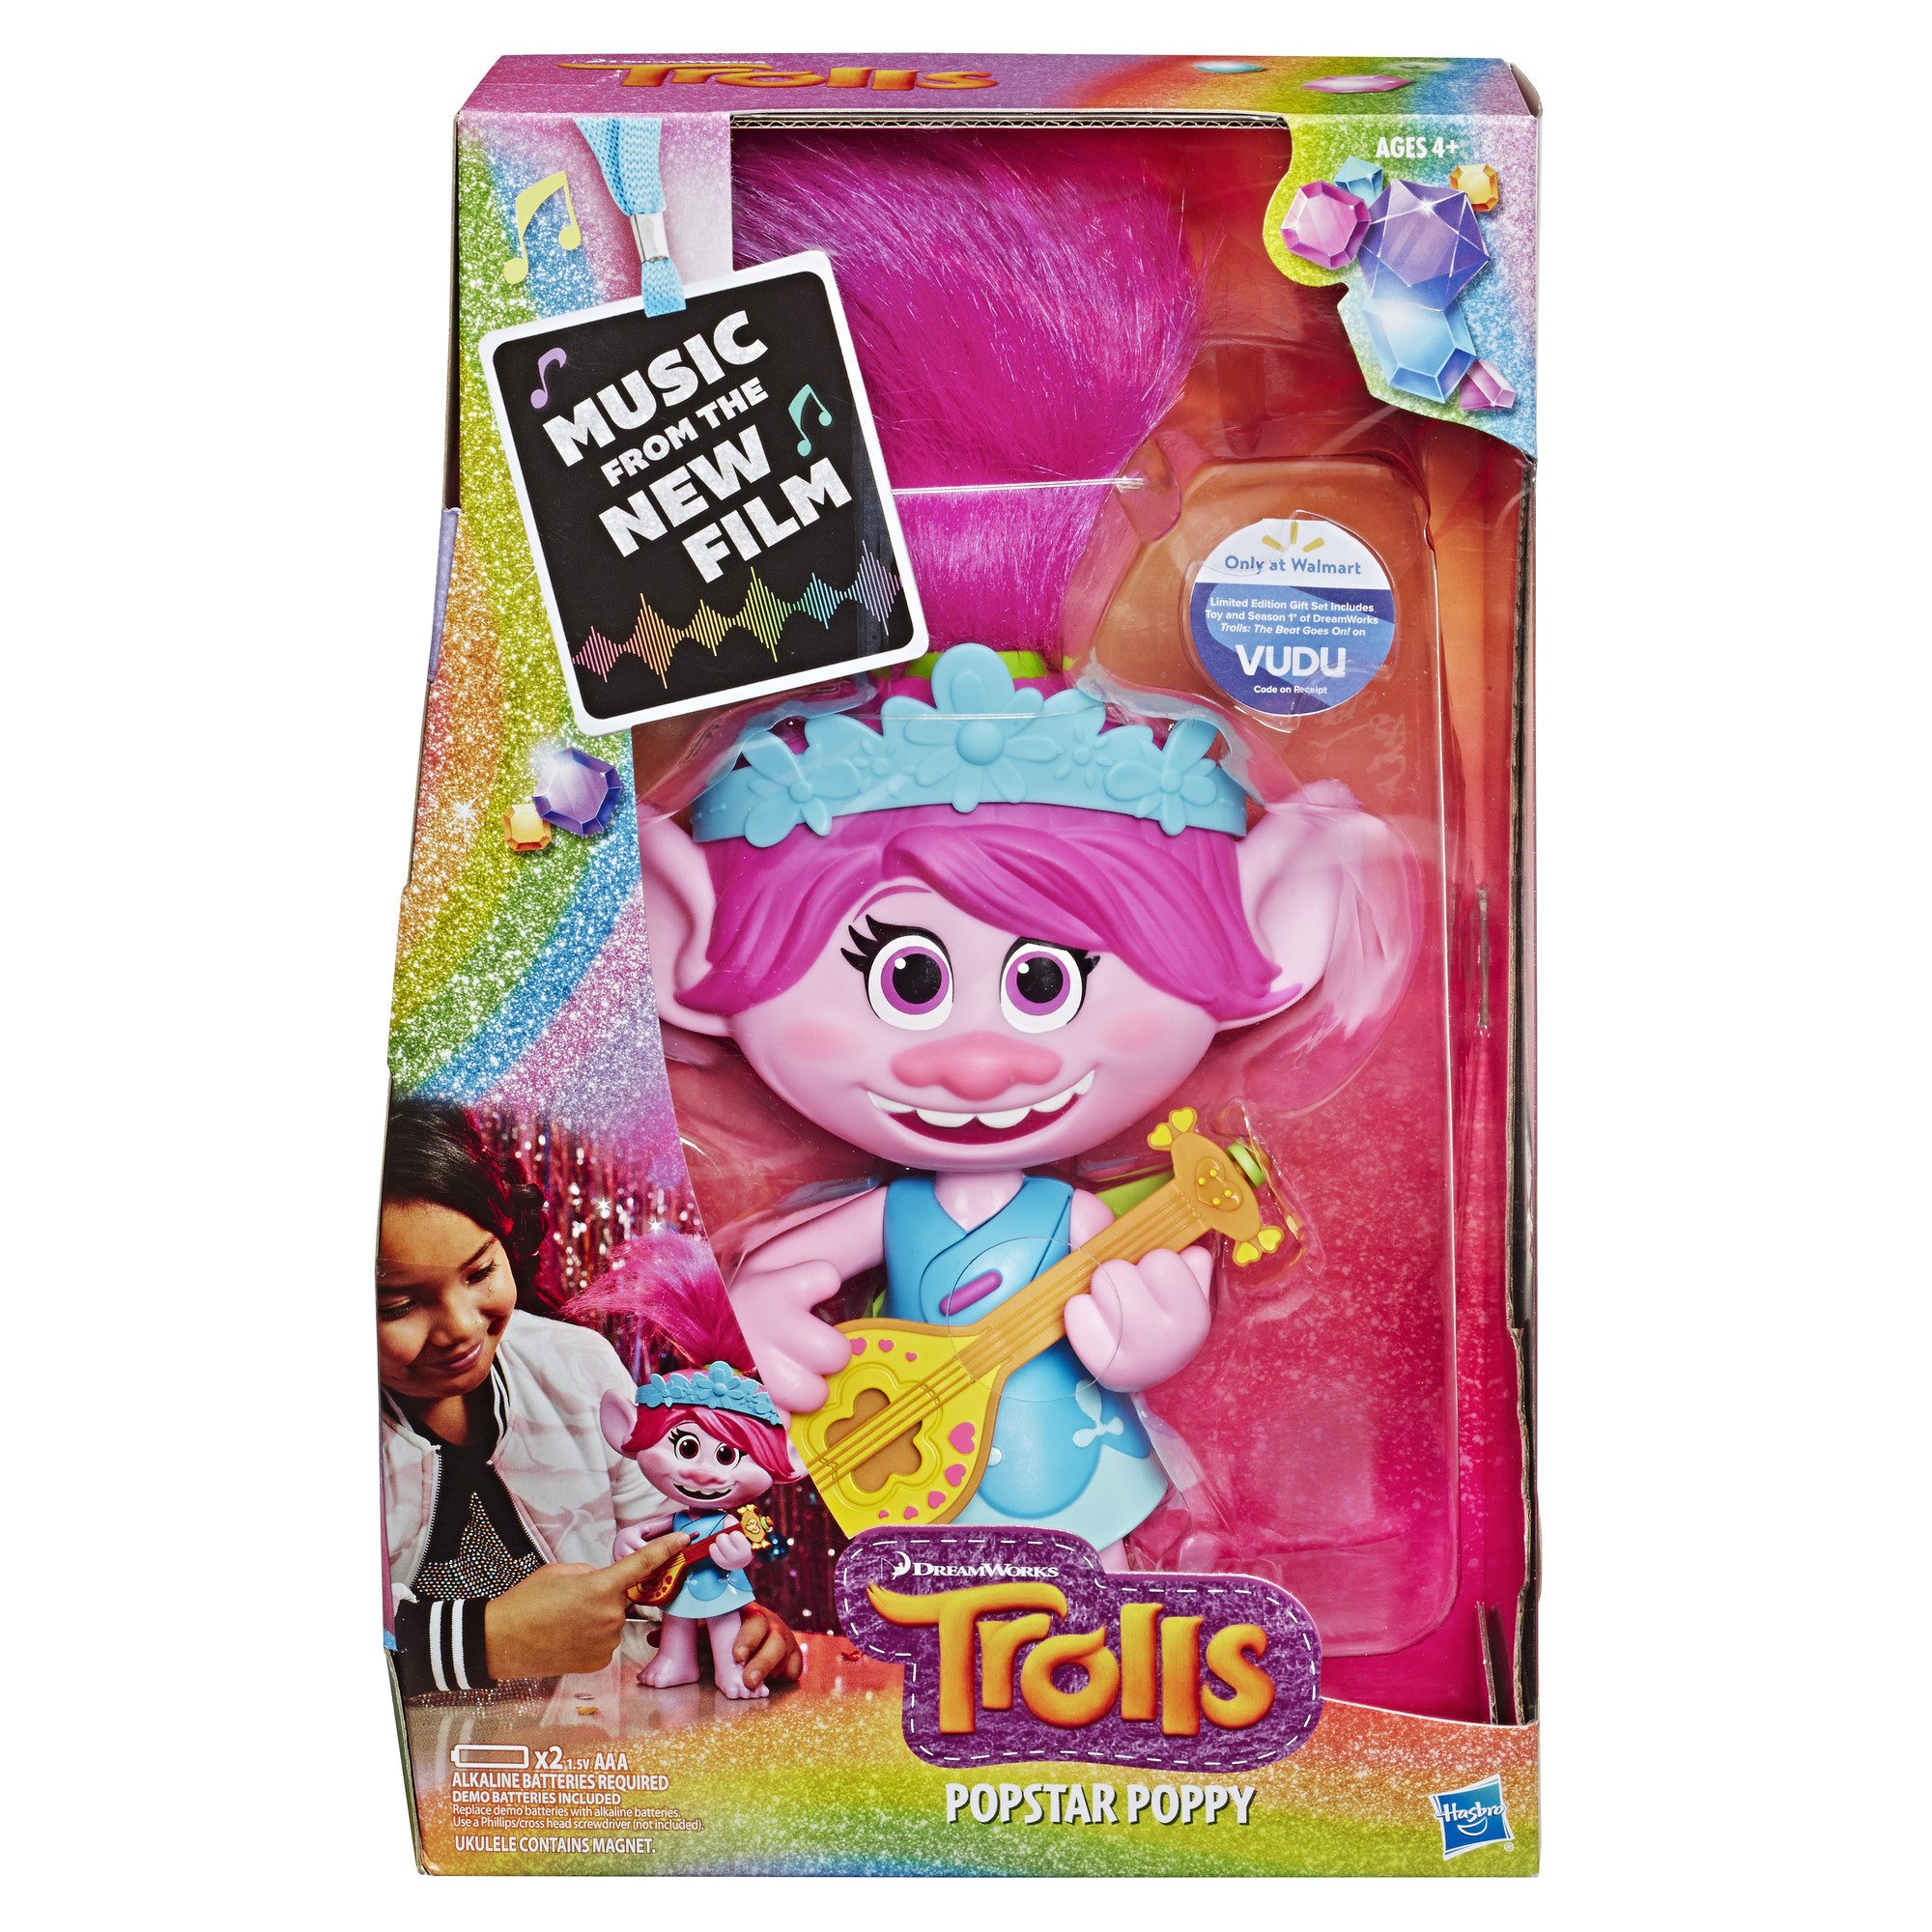 DreamWorks Trolls Popstar Poppy Singing Doll, Includes Toy Ukulele, Plays Movie Song - image 2 of 3